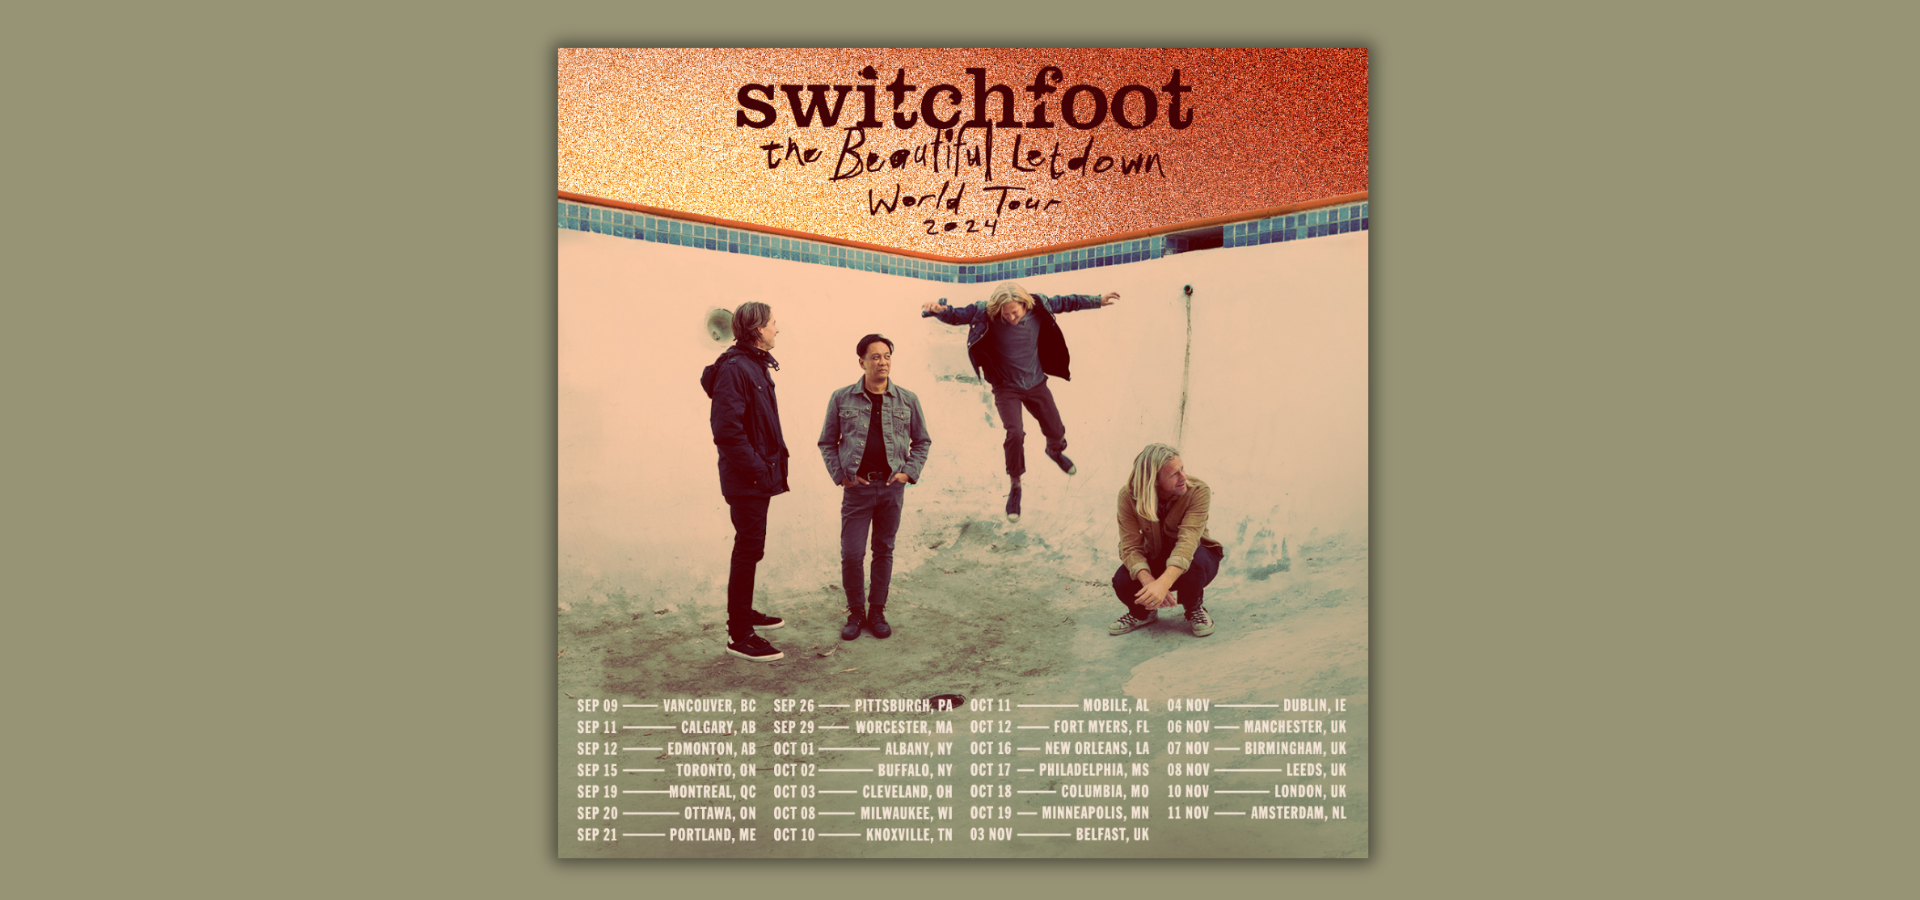 Switchfoot's 'The Beautiful Letdown' World Tour Dates